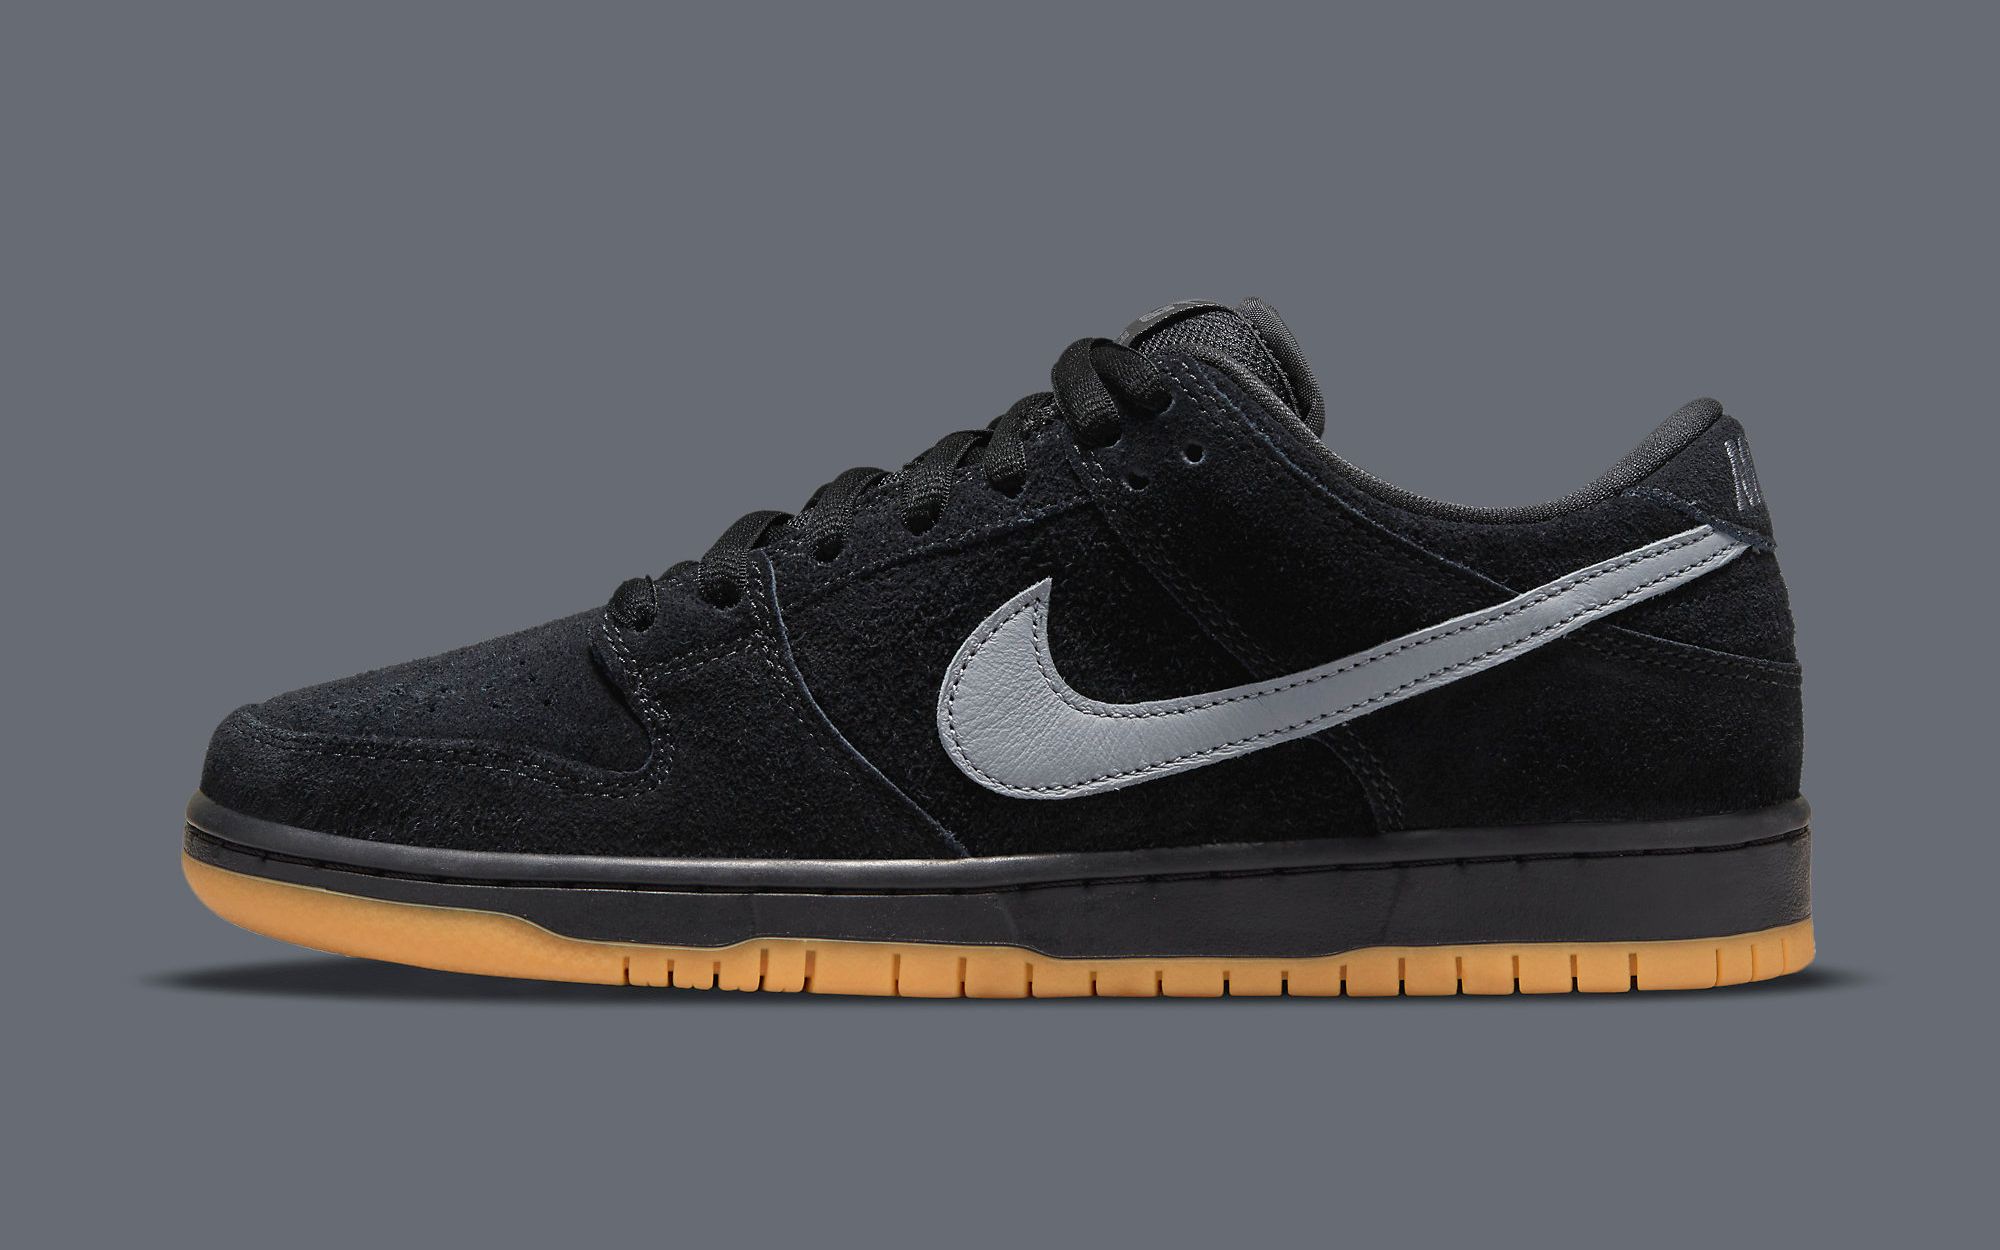 Where to Buy the Nike SB Dunk Low “Fog” | House of Heat°